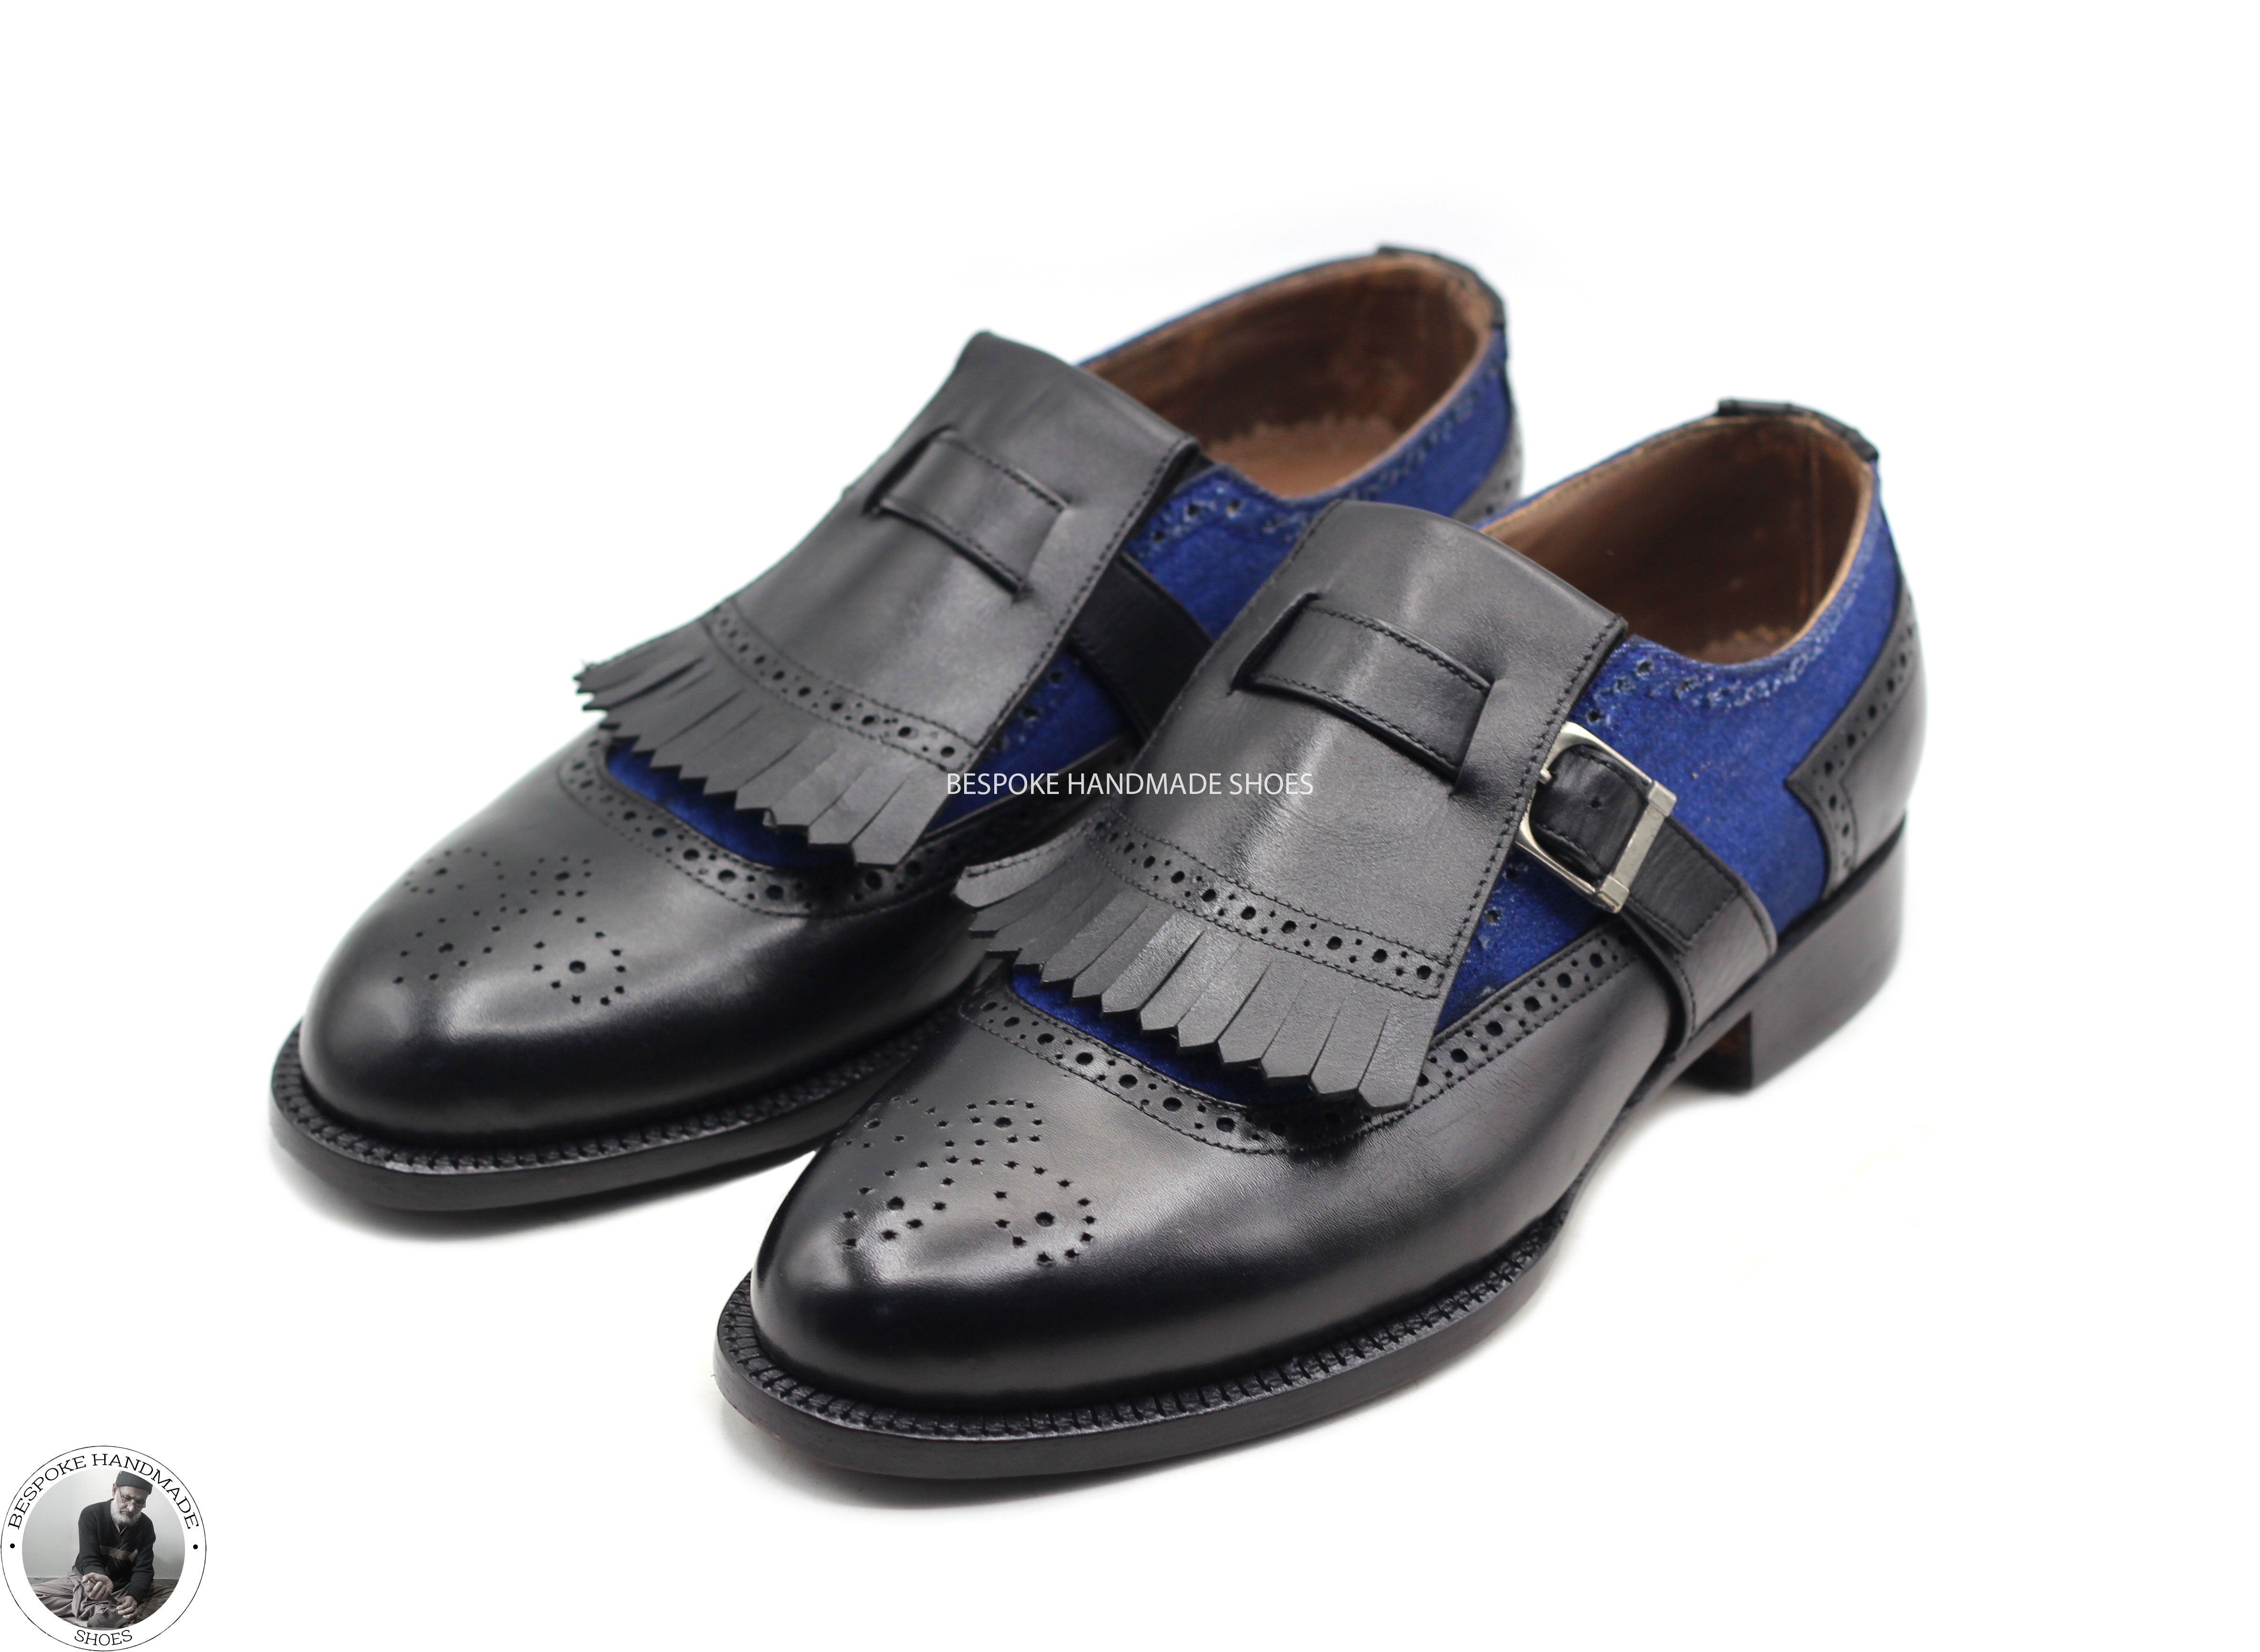 Men's Handmade Two Tone Leather Shoe, Single Monk Strap Cap Toe Brogue Dress Fashion Moccasin Goodyear Welted Shoes